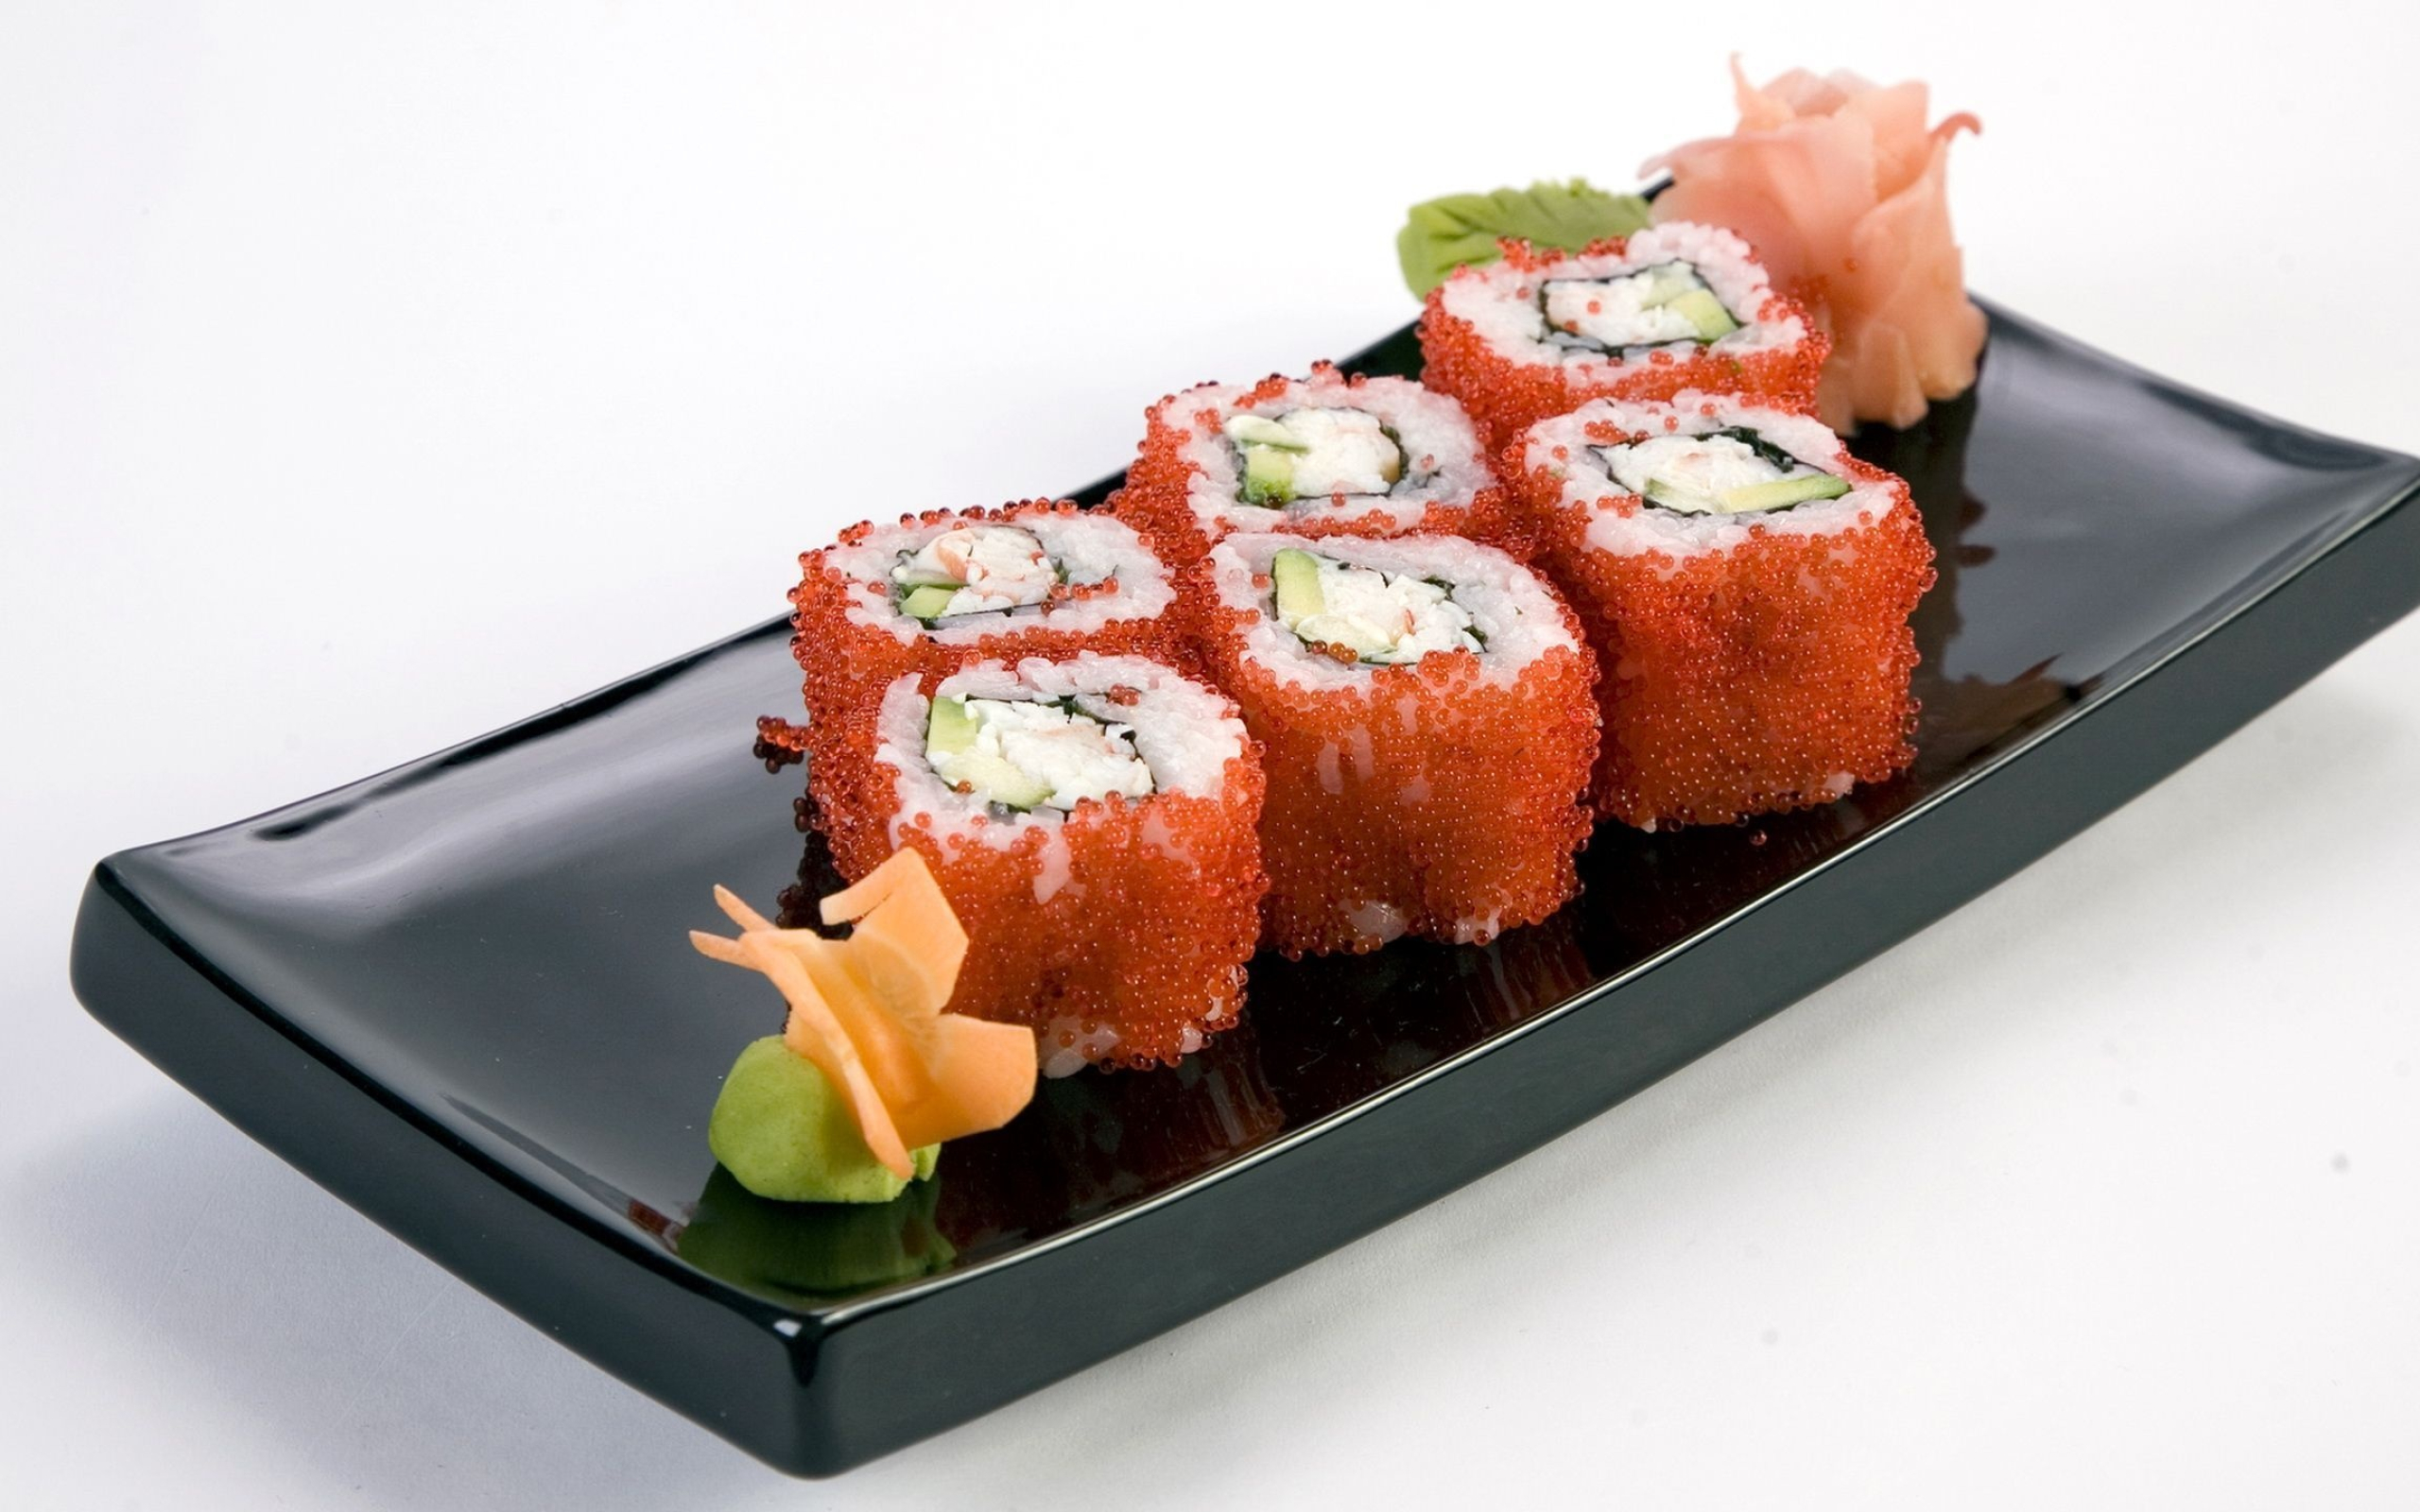 Sushi: California roll, The outer layer of rice is sprinkled with toasted sesame seeds or roe. 2560x1600 HD Wallpaper.